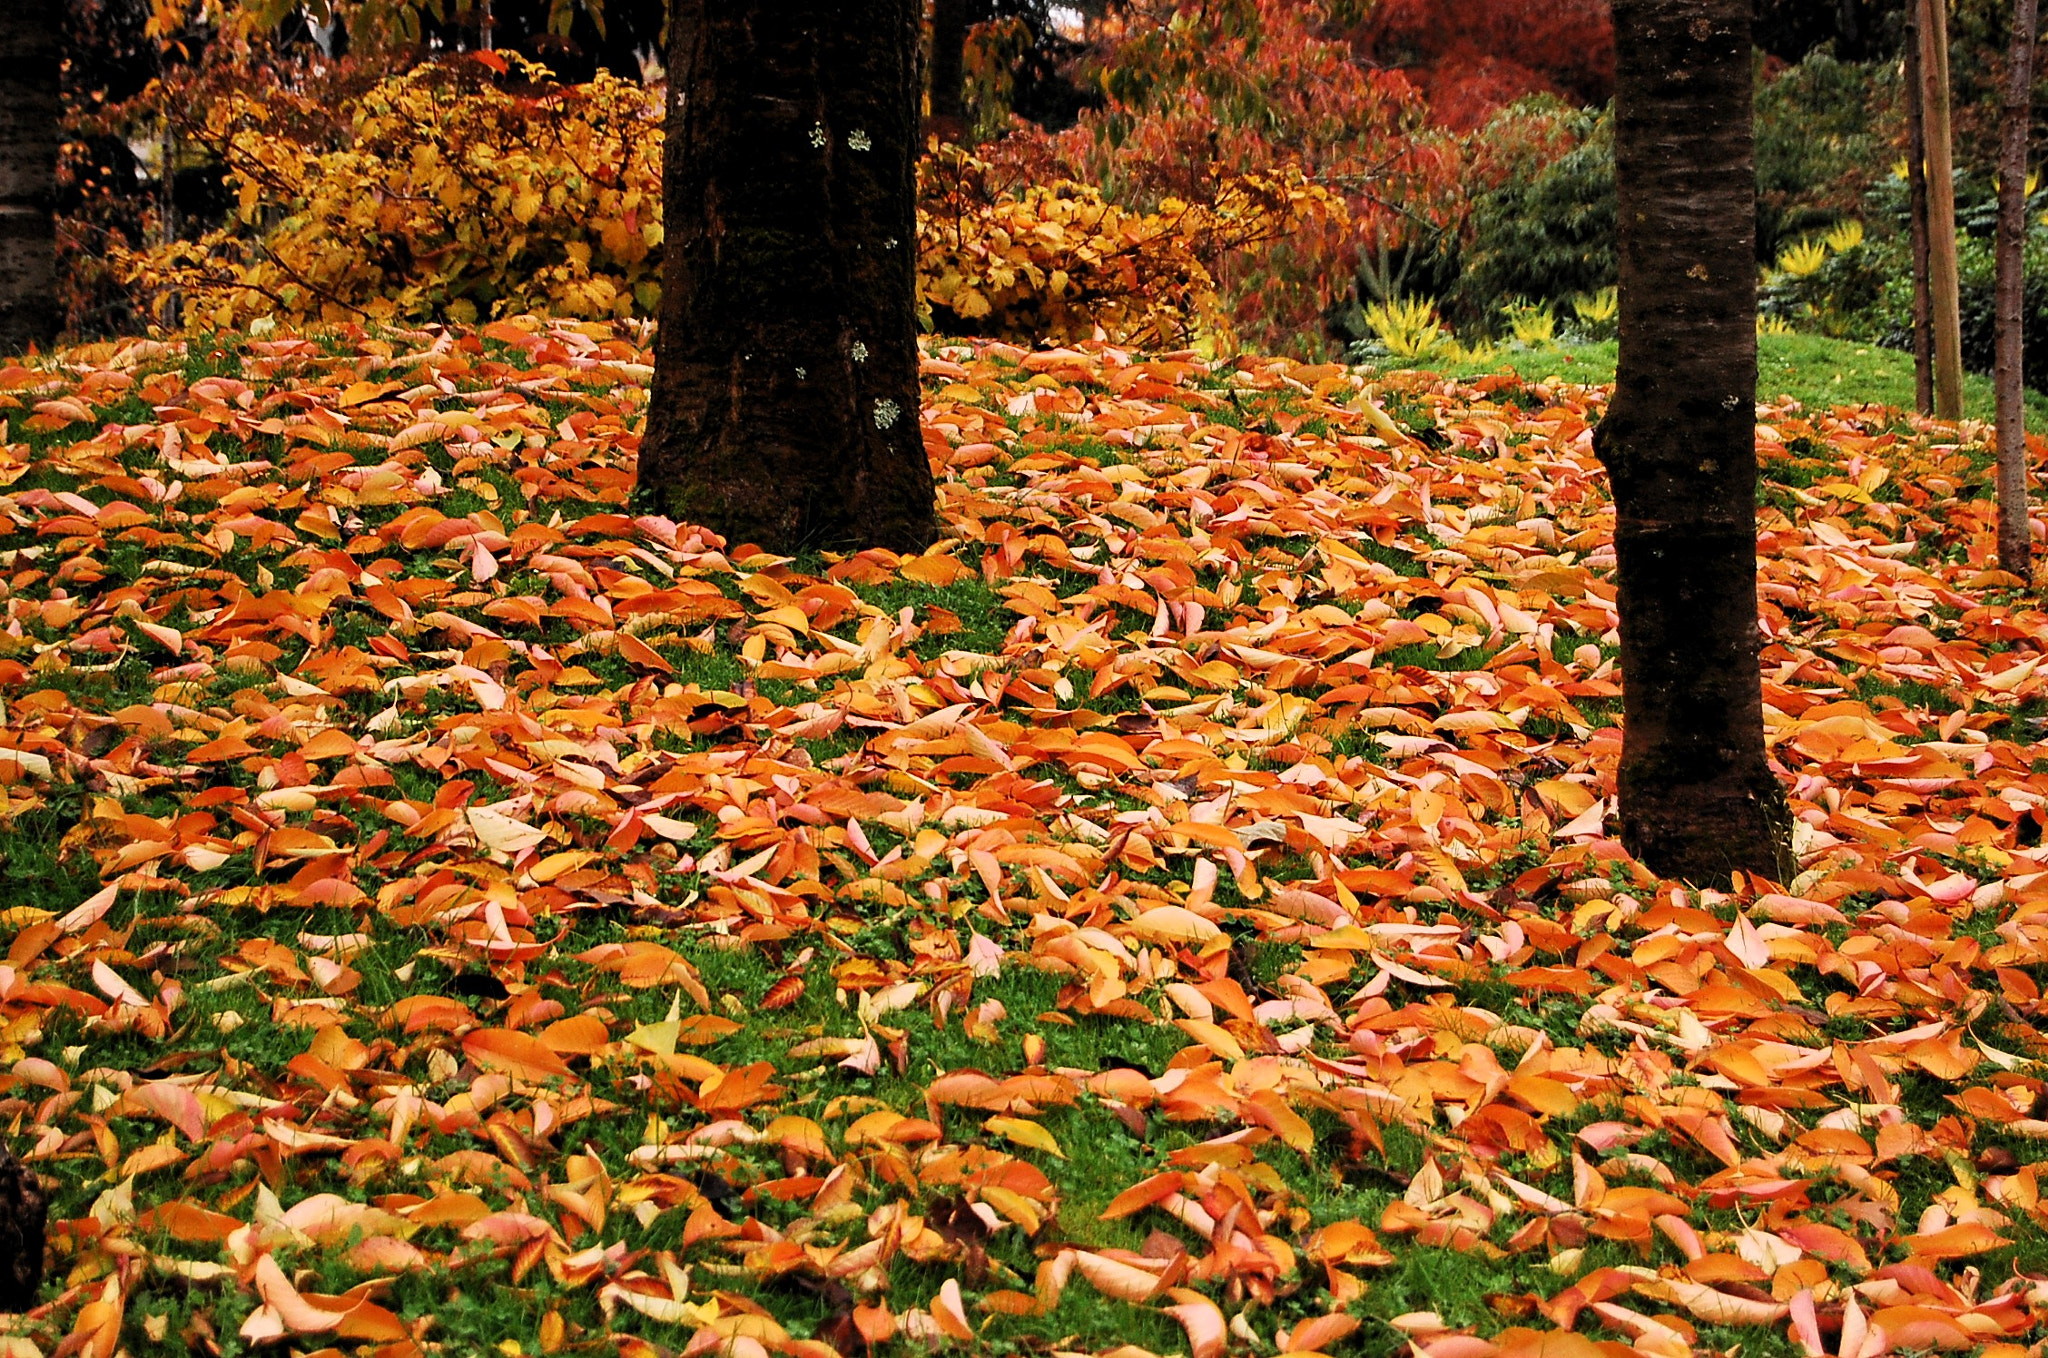 Green backyard lawn covered with crispy fallen autumn leaves.